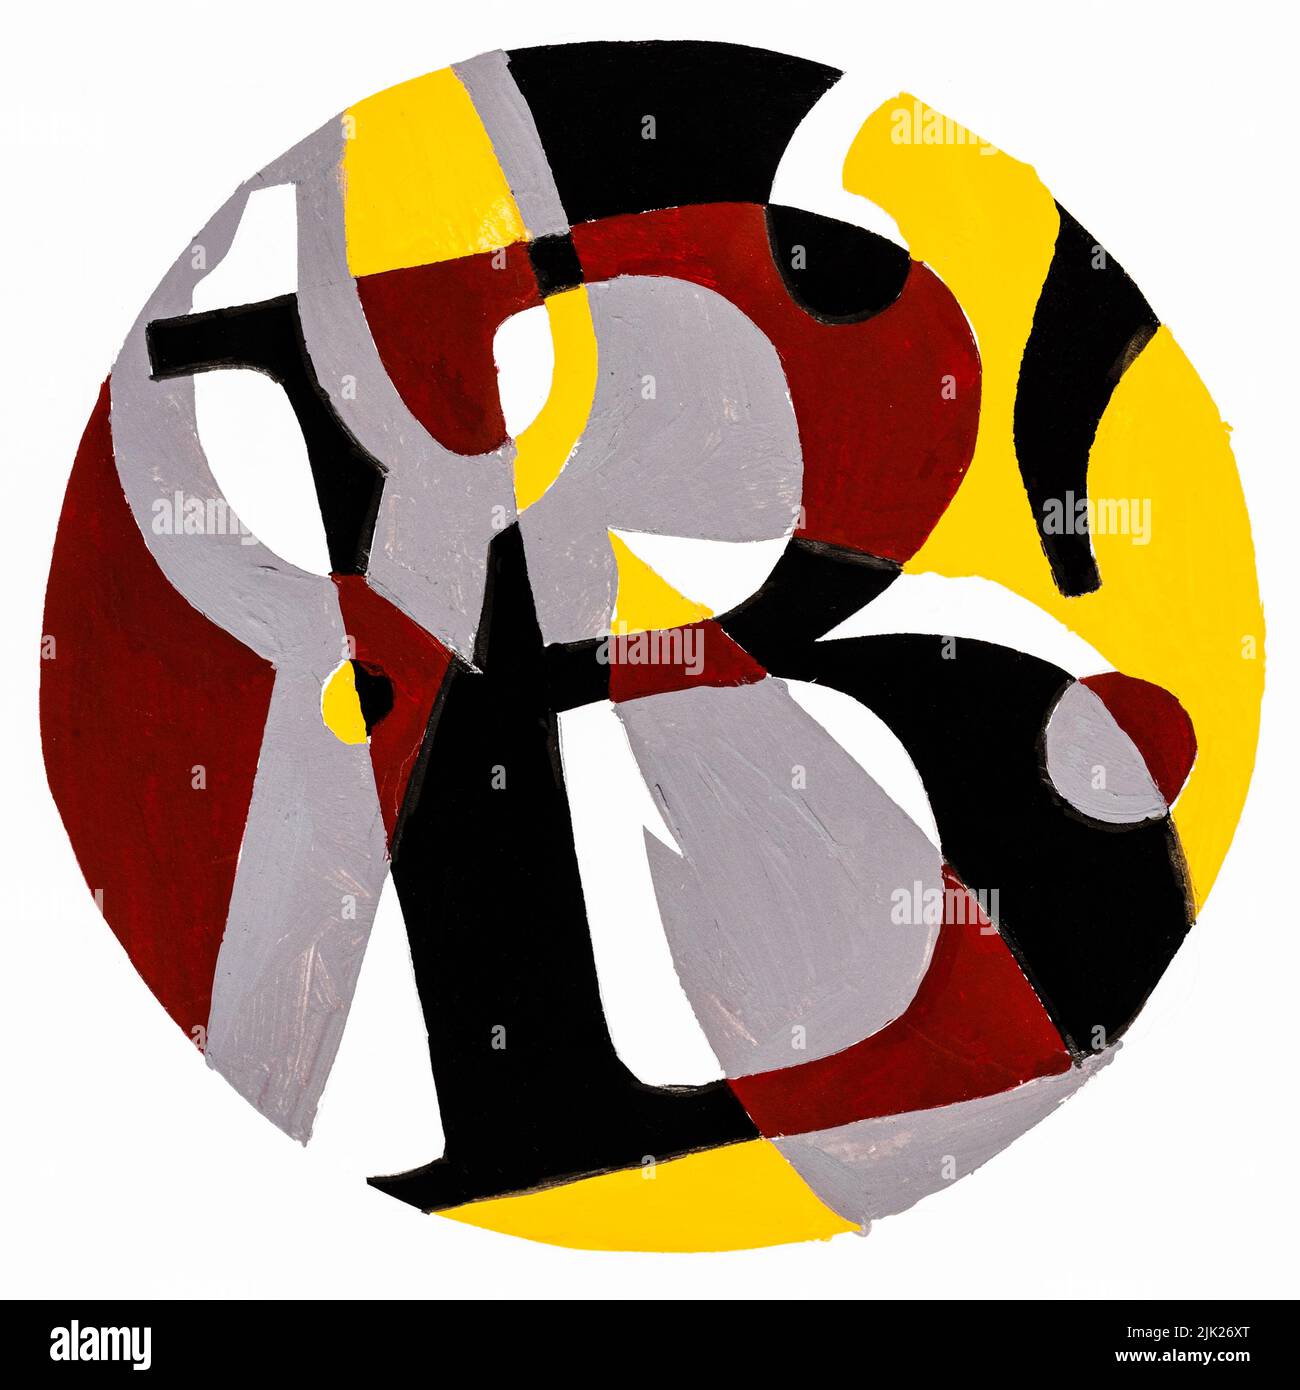 abstract round composition with letter B , scissors and question mark hand-painted with yellow, brown and black tempera paints on white paper Stock Photo